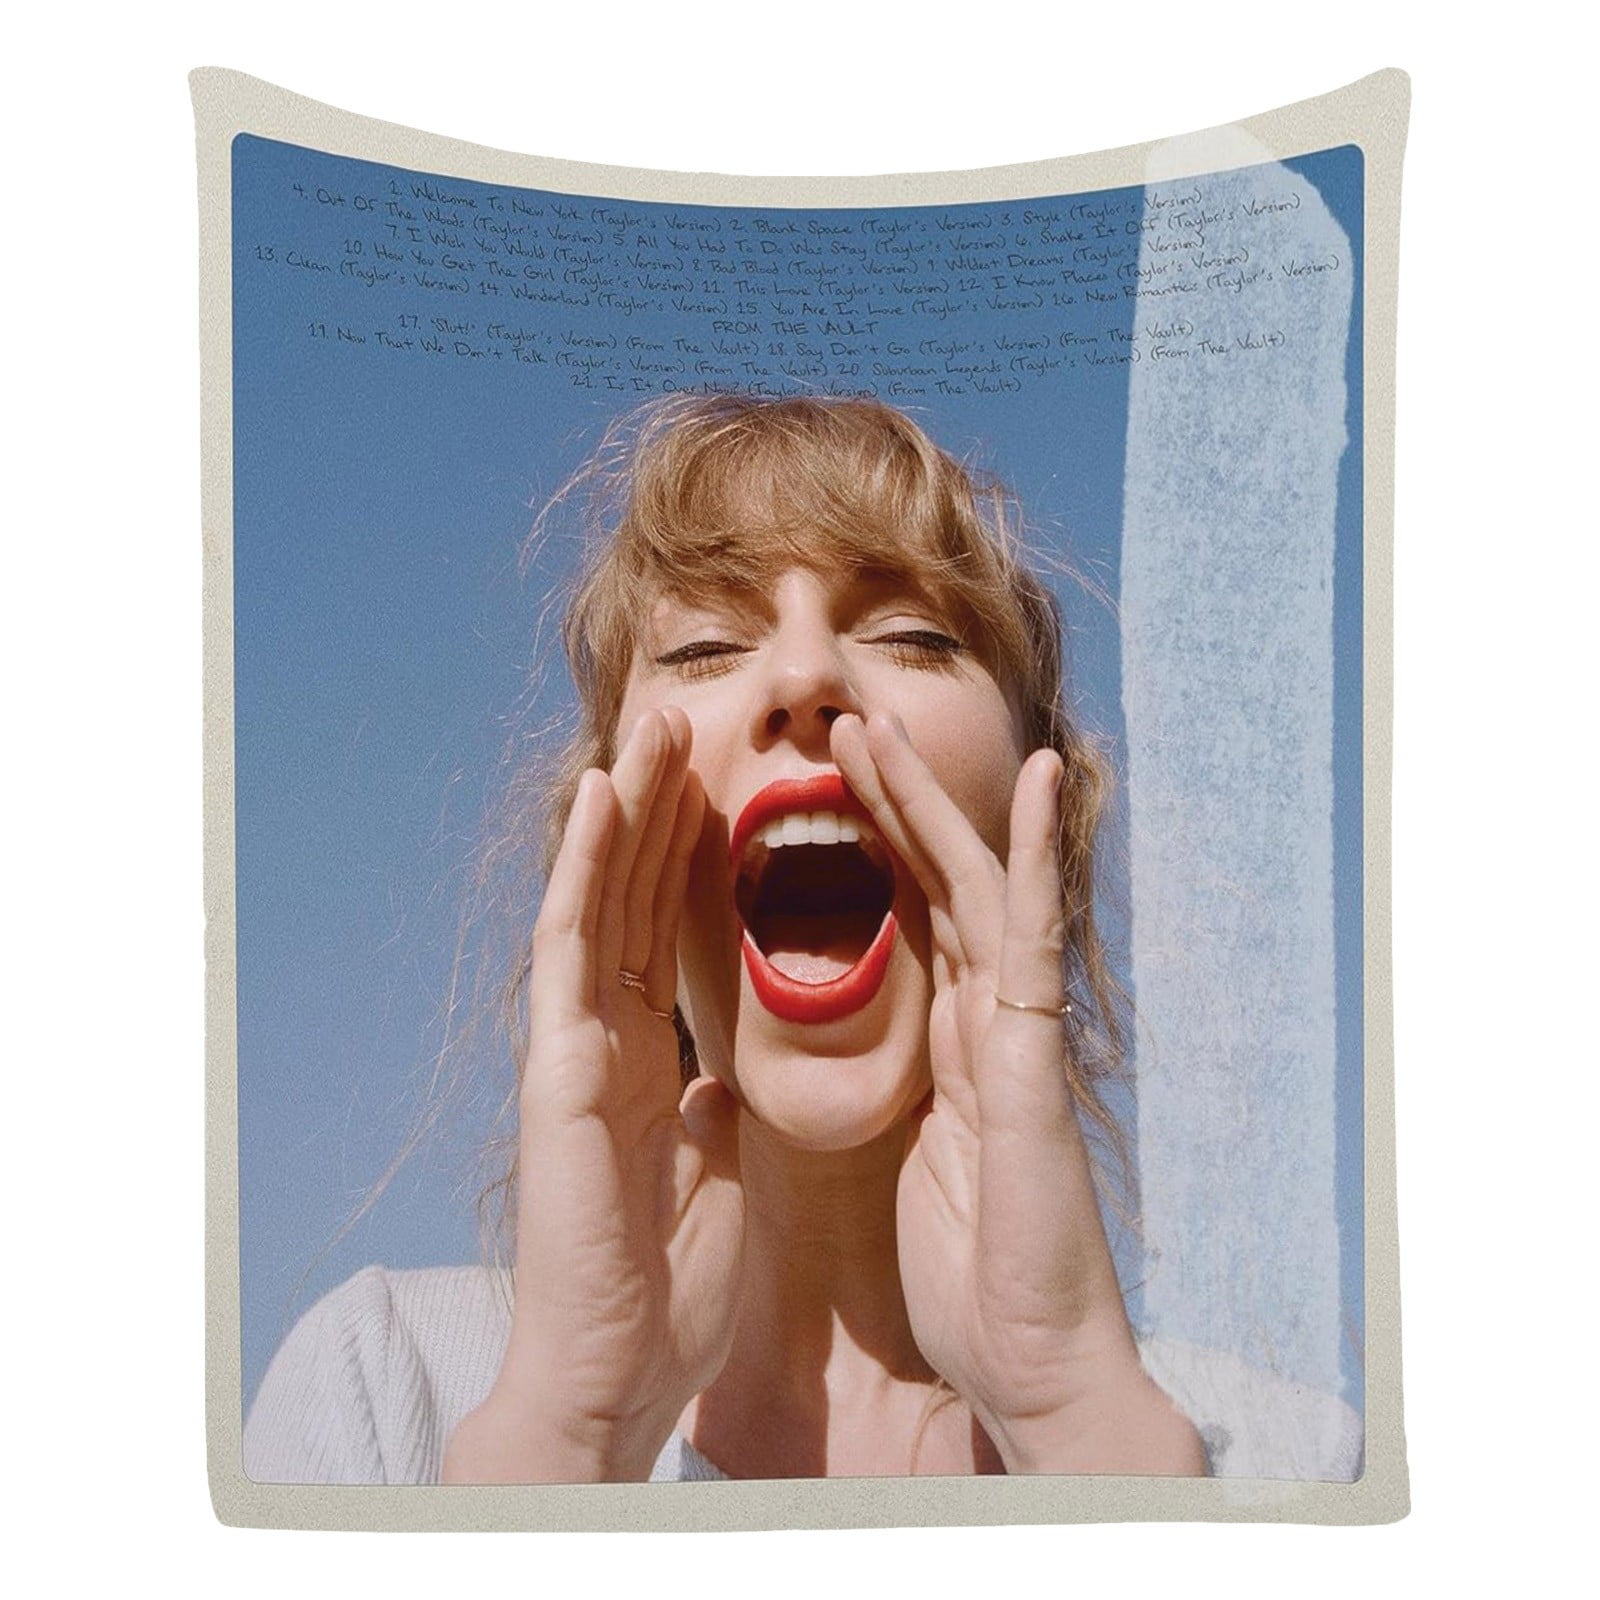 Taylor Swift Merch: Taylor Swift Blanket - Taylor Girls Pop Singer Inspired  Throw Flannel Blanket Gifts for Music Lovers Women Girls, Cozy Travel  Blanket Perfect for Sofa Bed 